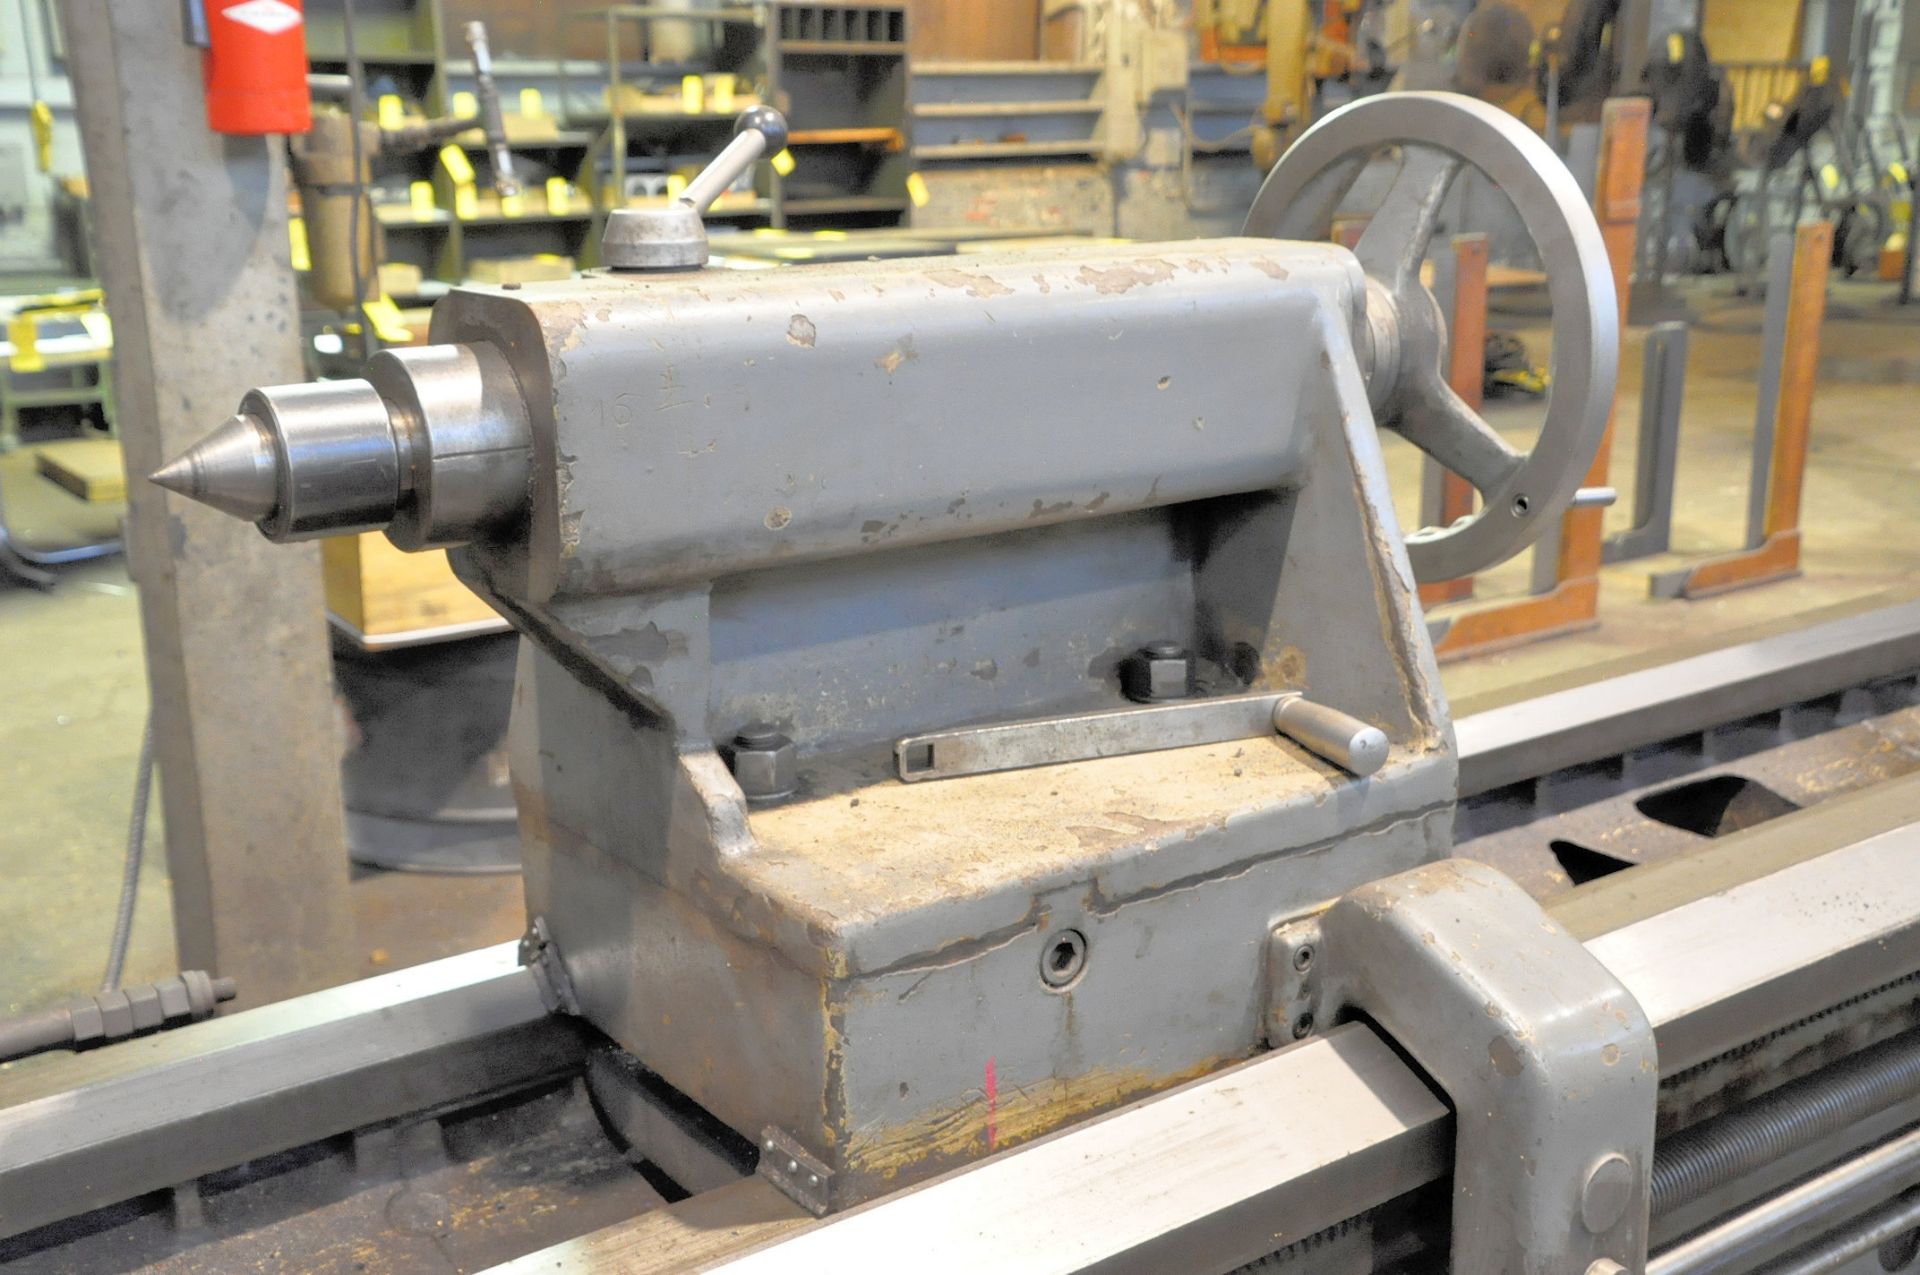 Sirco Model PA-36 36" X 240" Gap Bed Engine Lathe, S/N 511, 34" 4-Jaw Chuck, Tool post, (2) Steady - Image 5 of 9